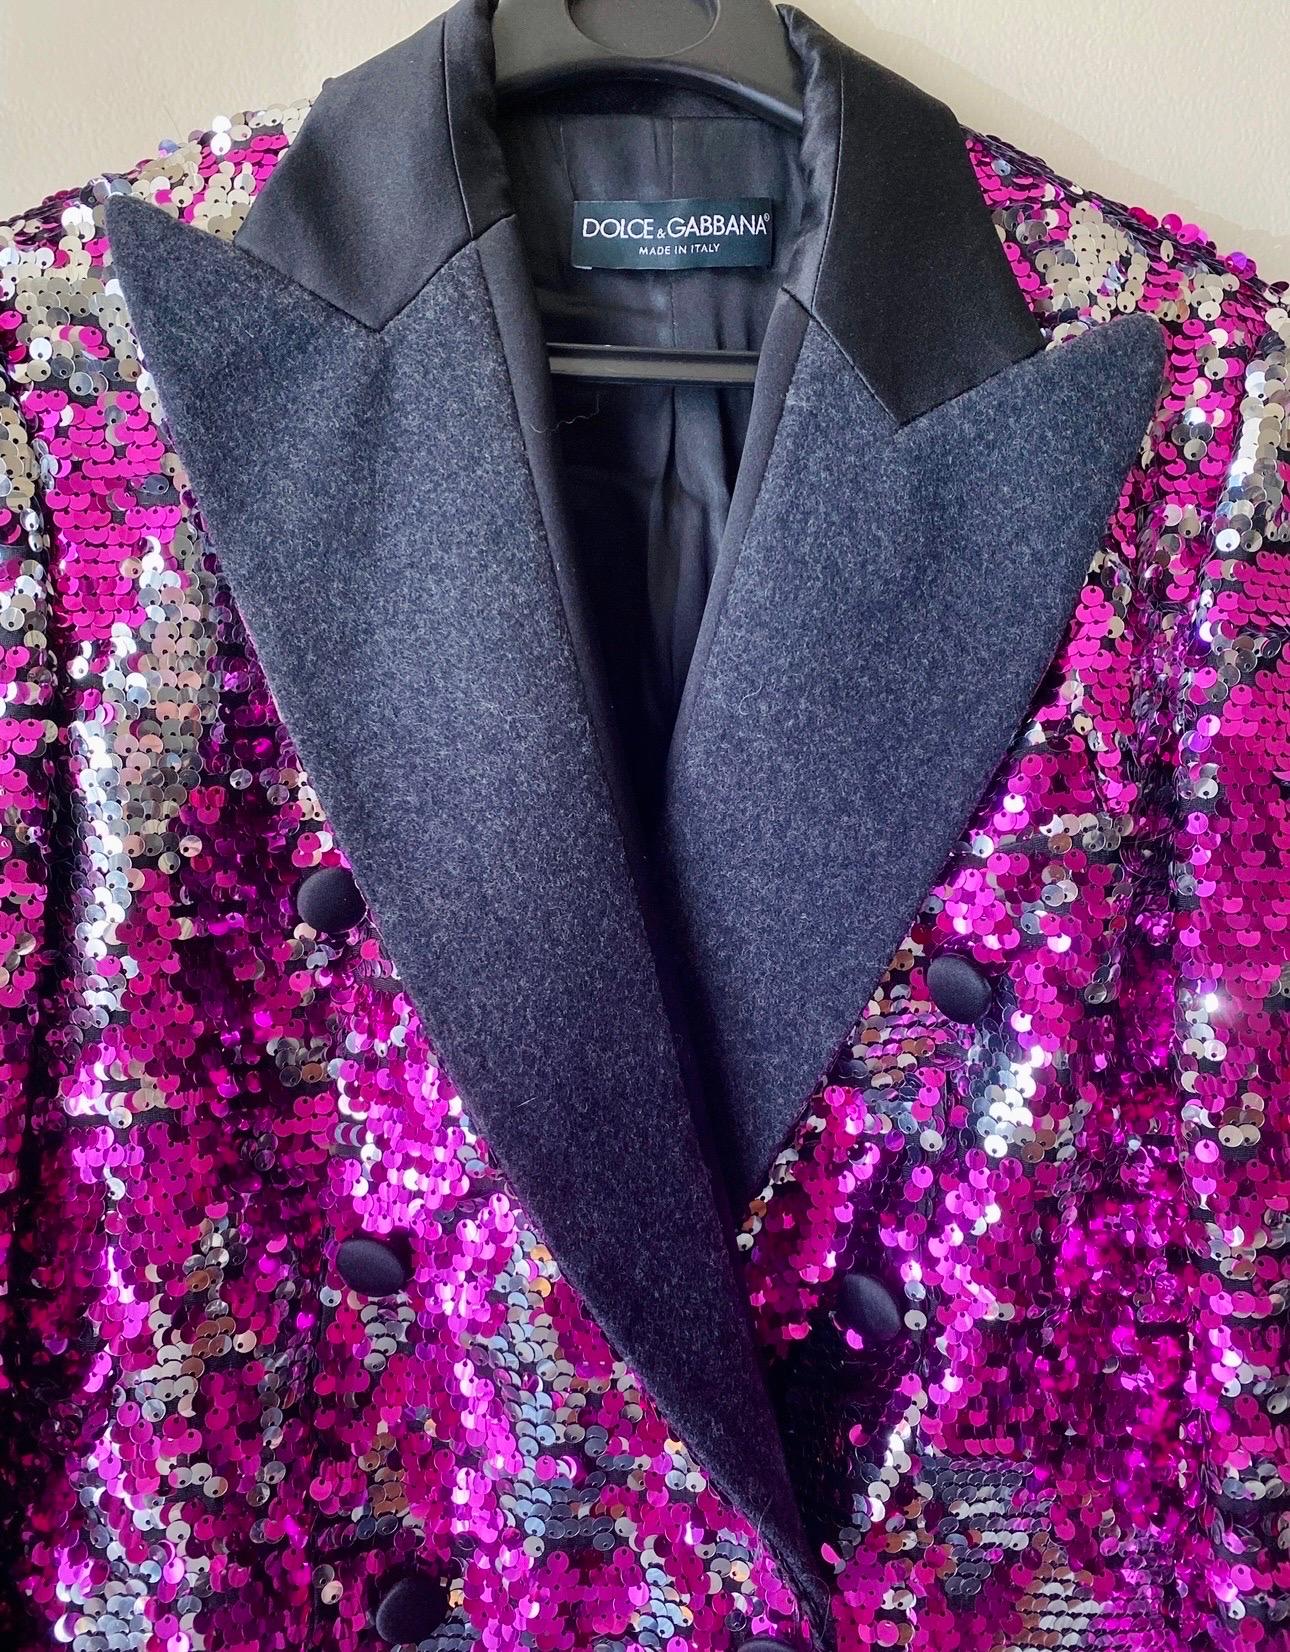 Dolce & Gabbana runway Fall Winter 2011 pink sequined jacket as seen on Beyonce performing for the MTV awards in 2011, fits perfectly for a size 36 FR and 38 FR, it's a size 38 IT very good condition. 